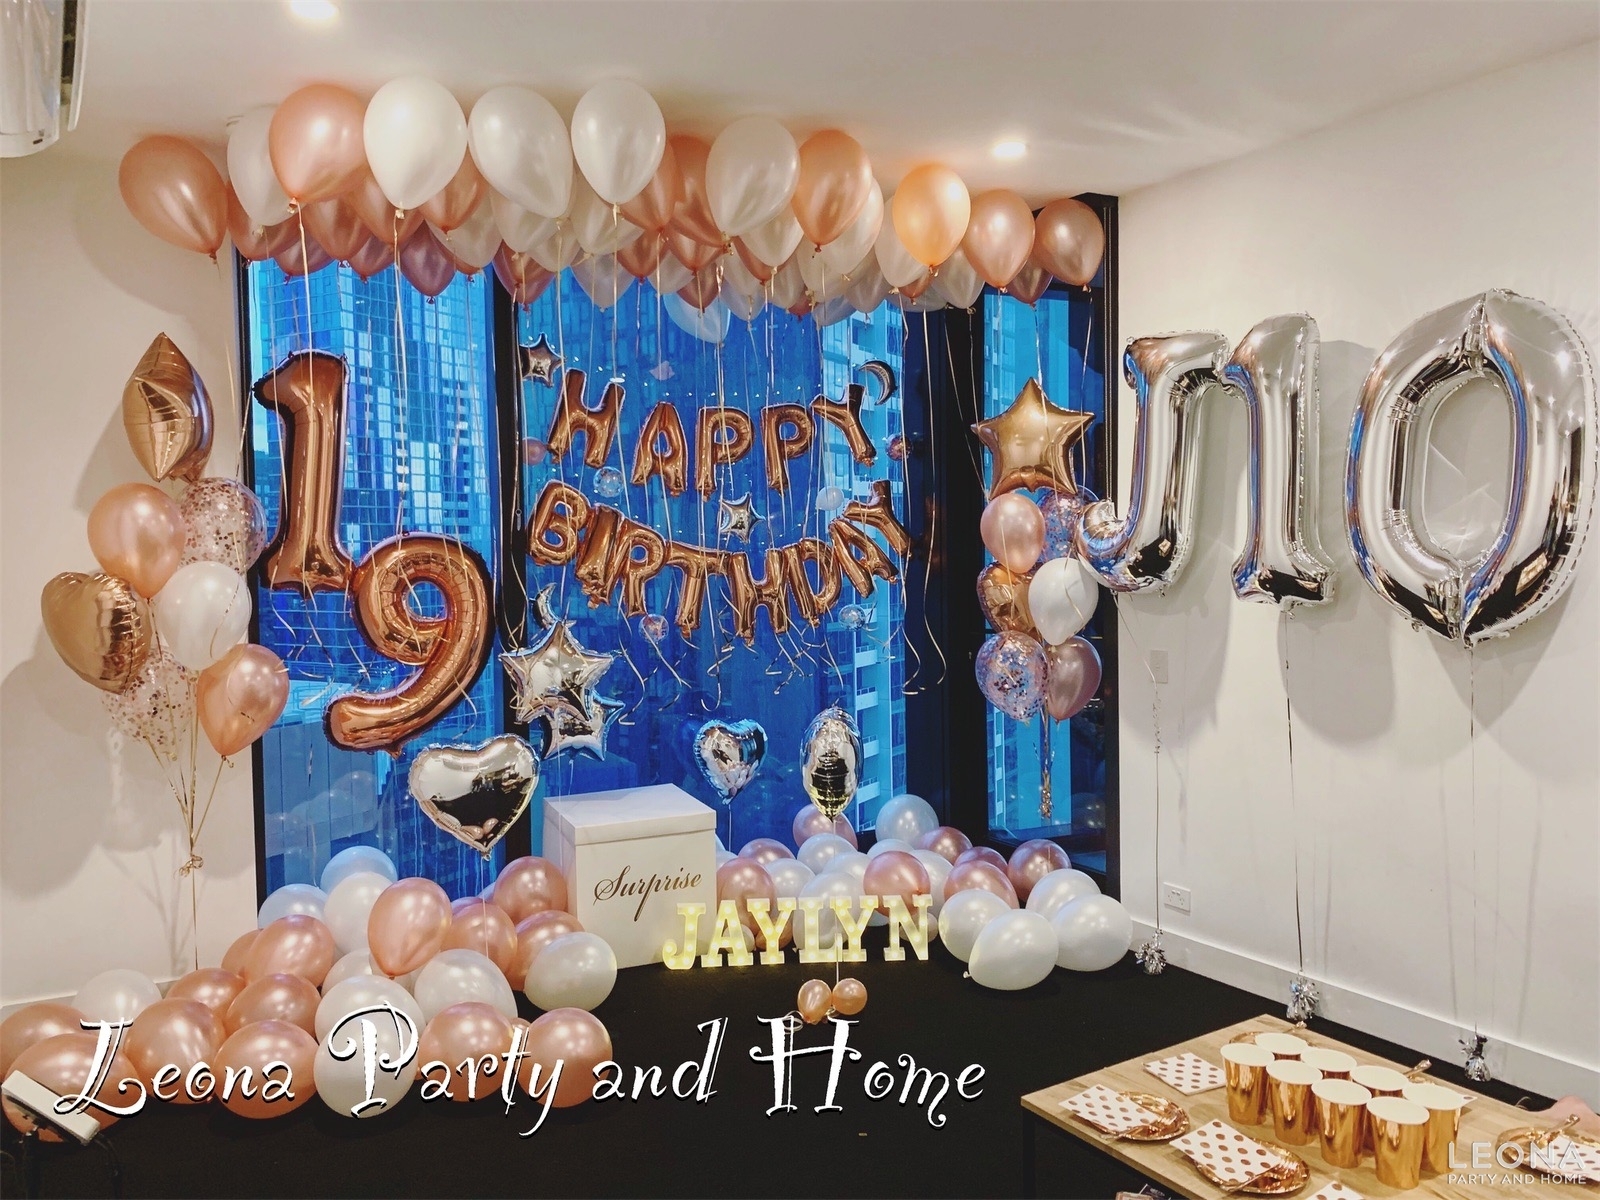 $599 Balloon Package B - 599 balloon package b - 1    - Leona Party and Home